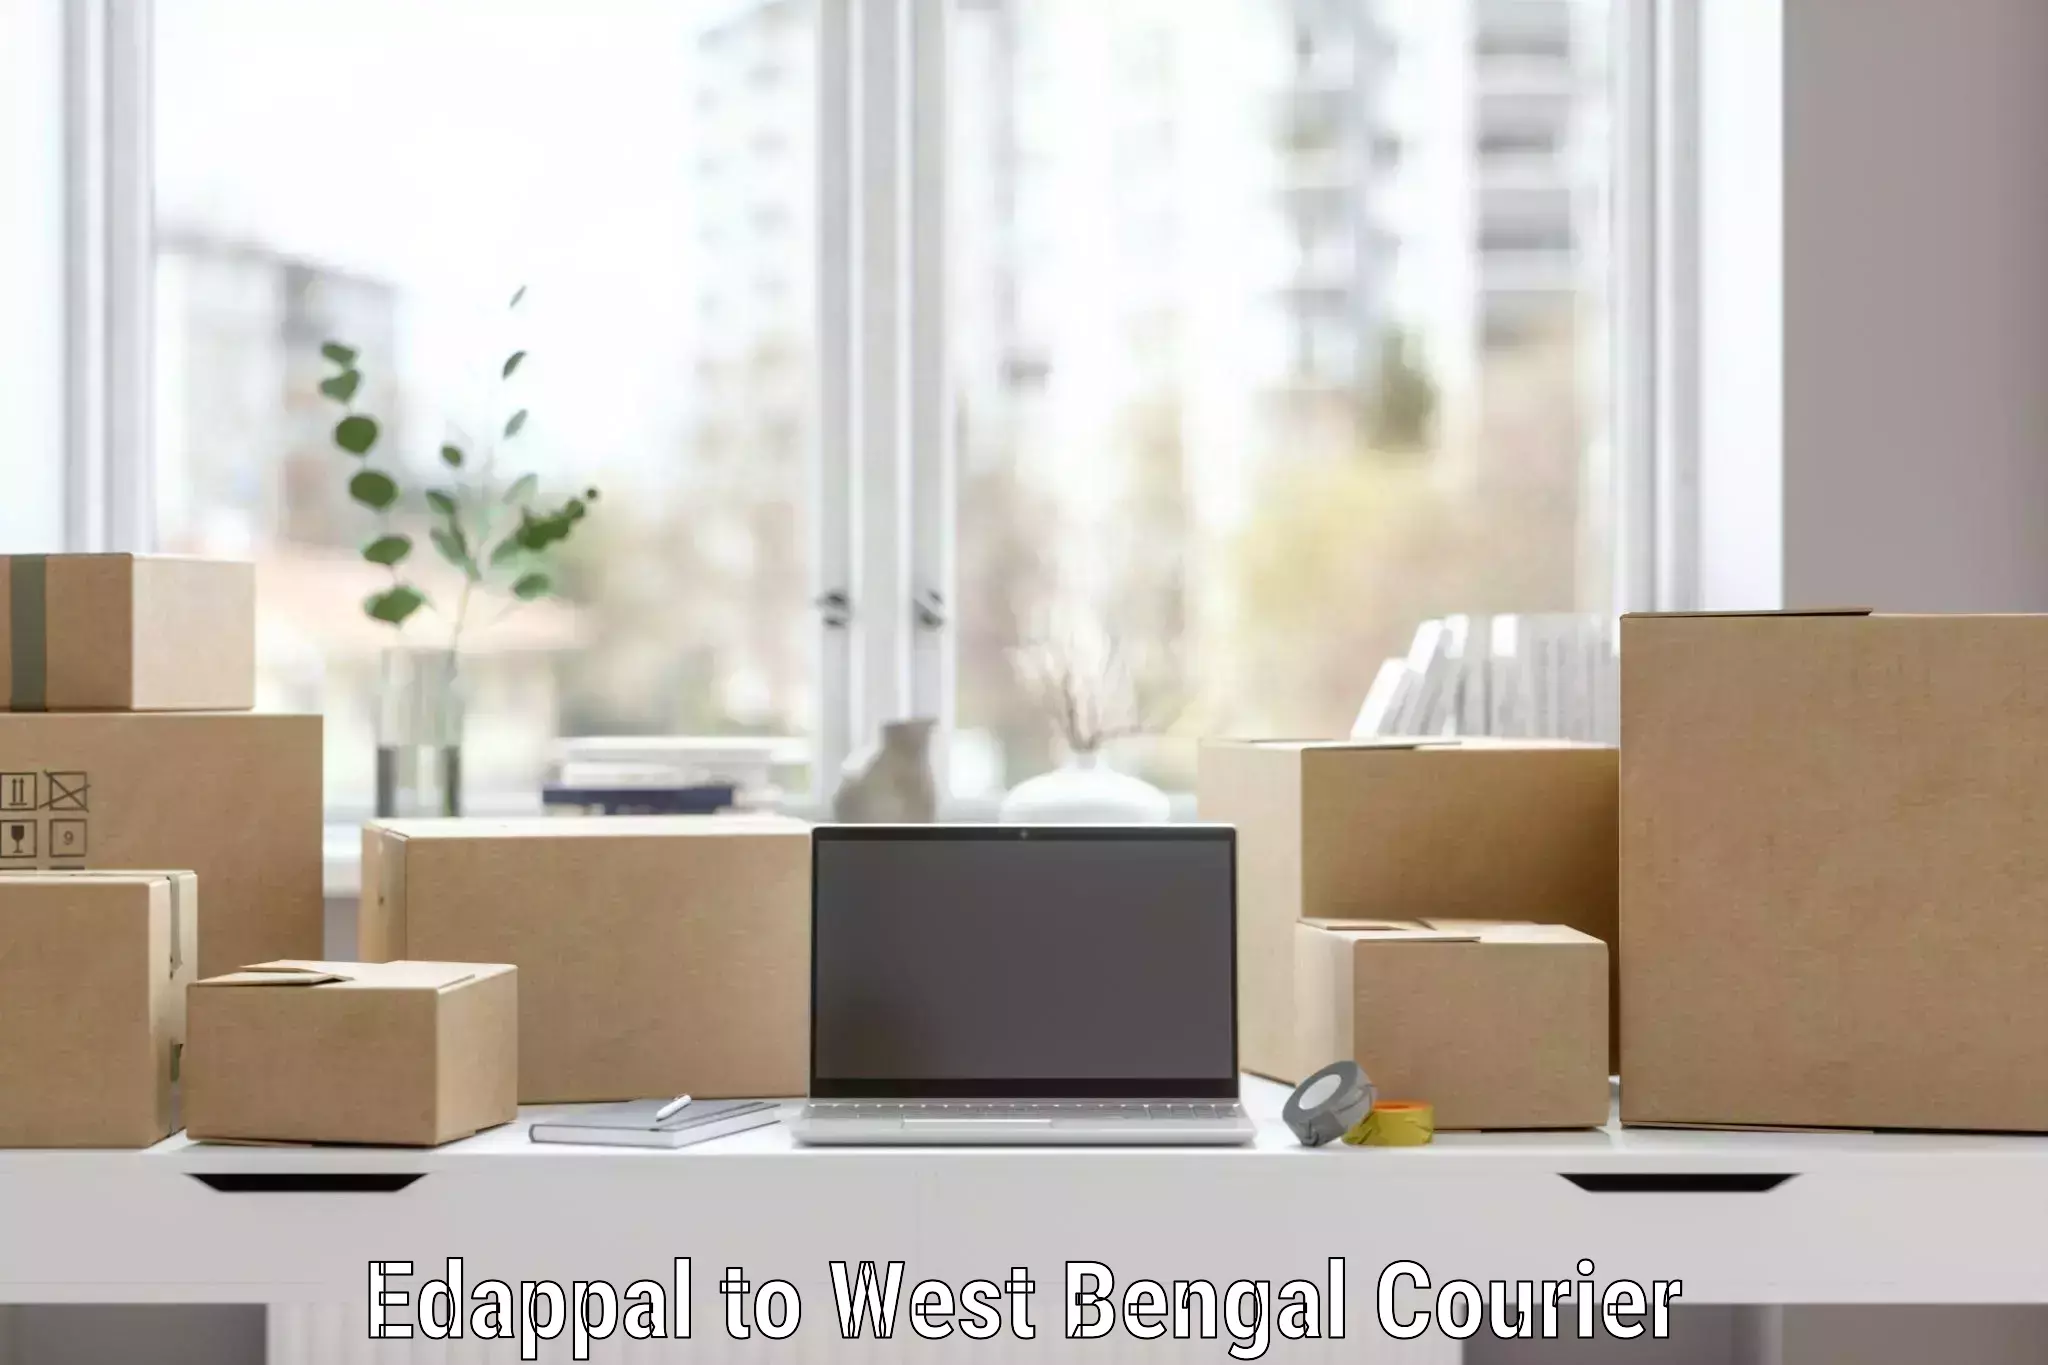 Furniture delivery service Edappal to West Bengal